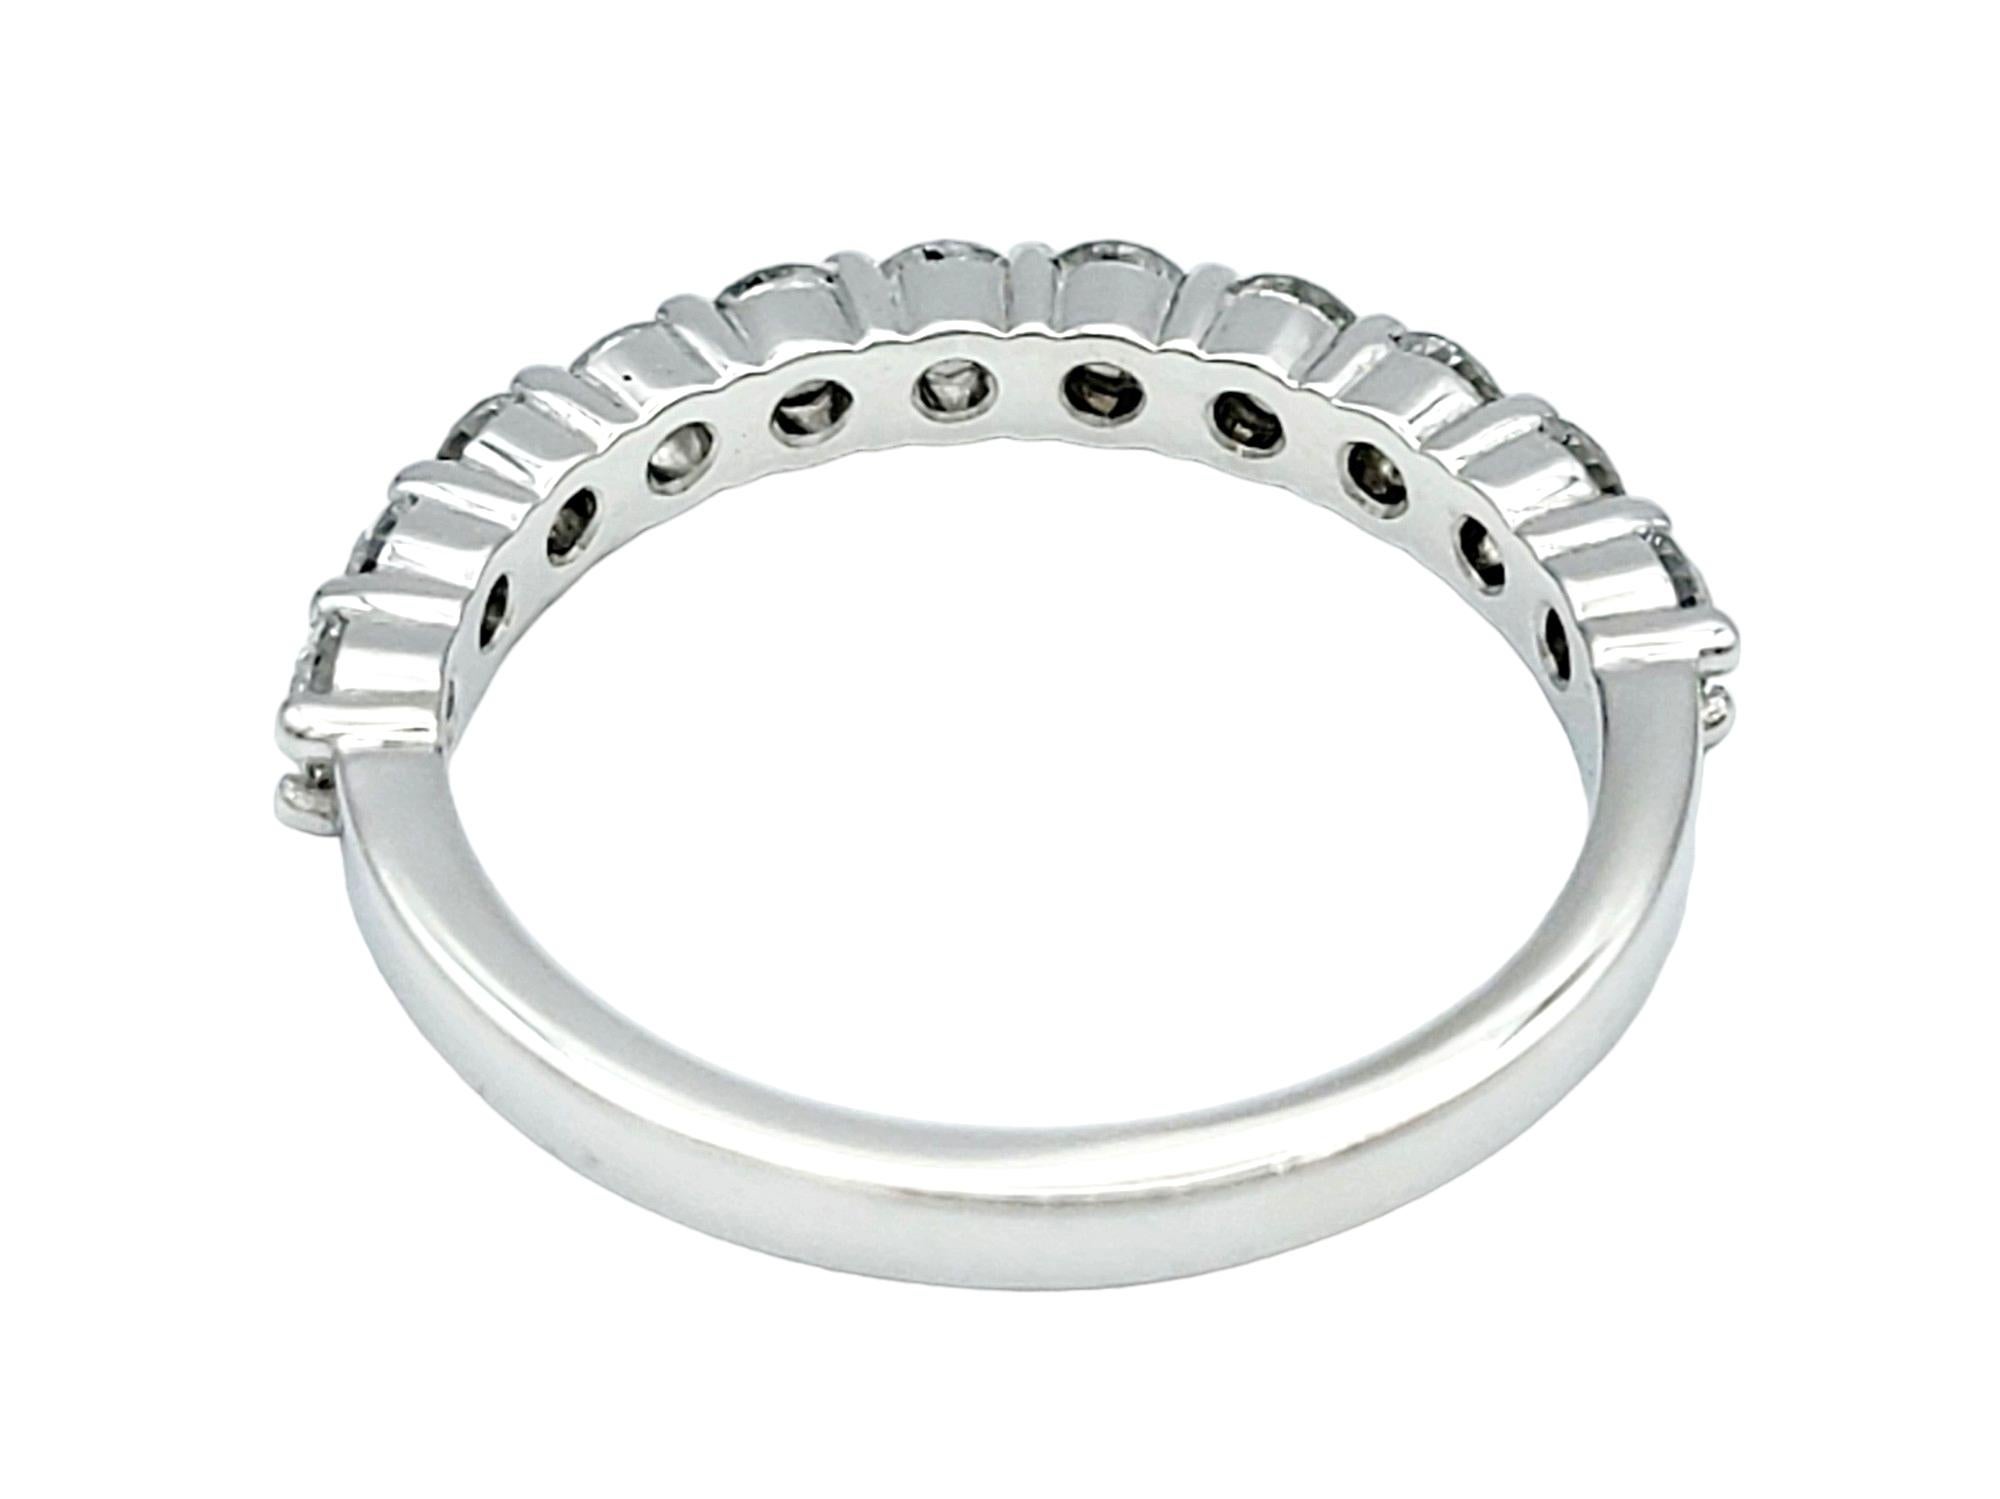 Semi-Eternity Round Diamond Band Ring Set in Polished 18 Karat White Gold In Good Condition For Sale In Scottsdale, AZ